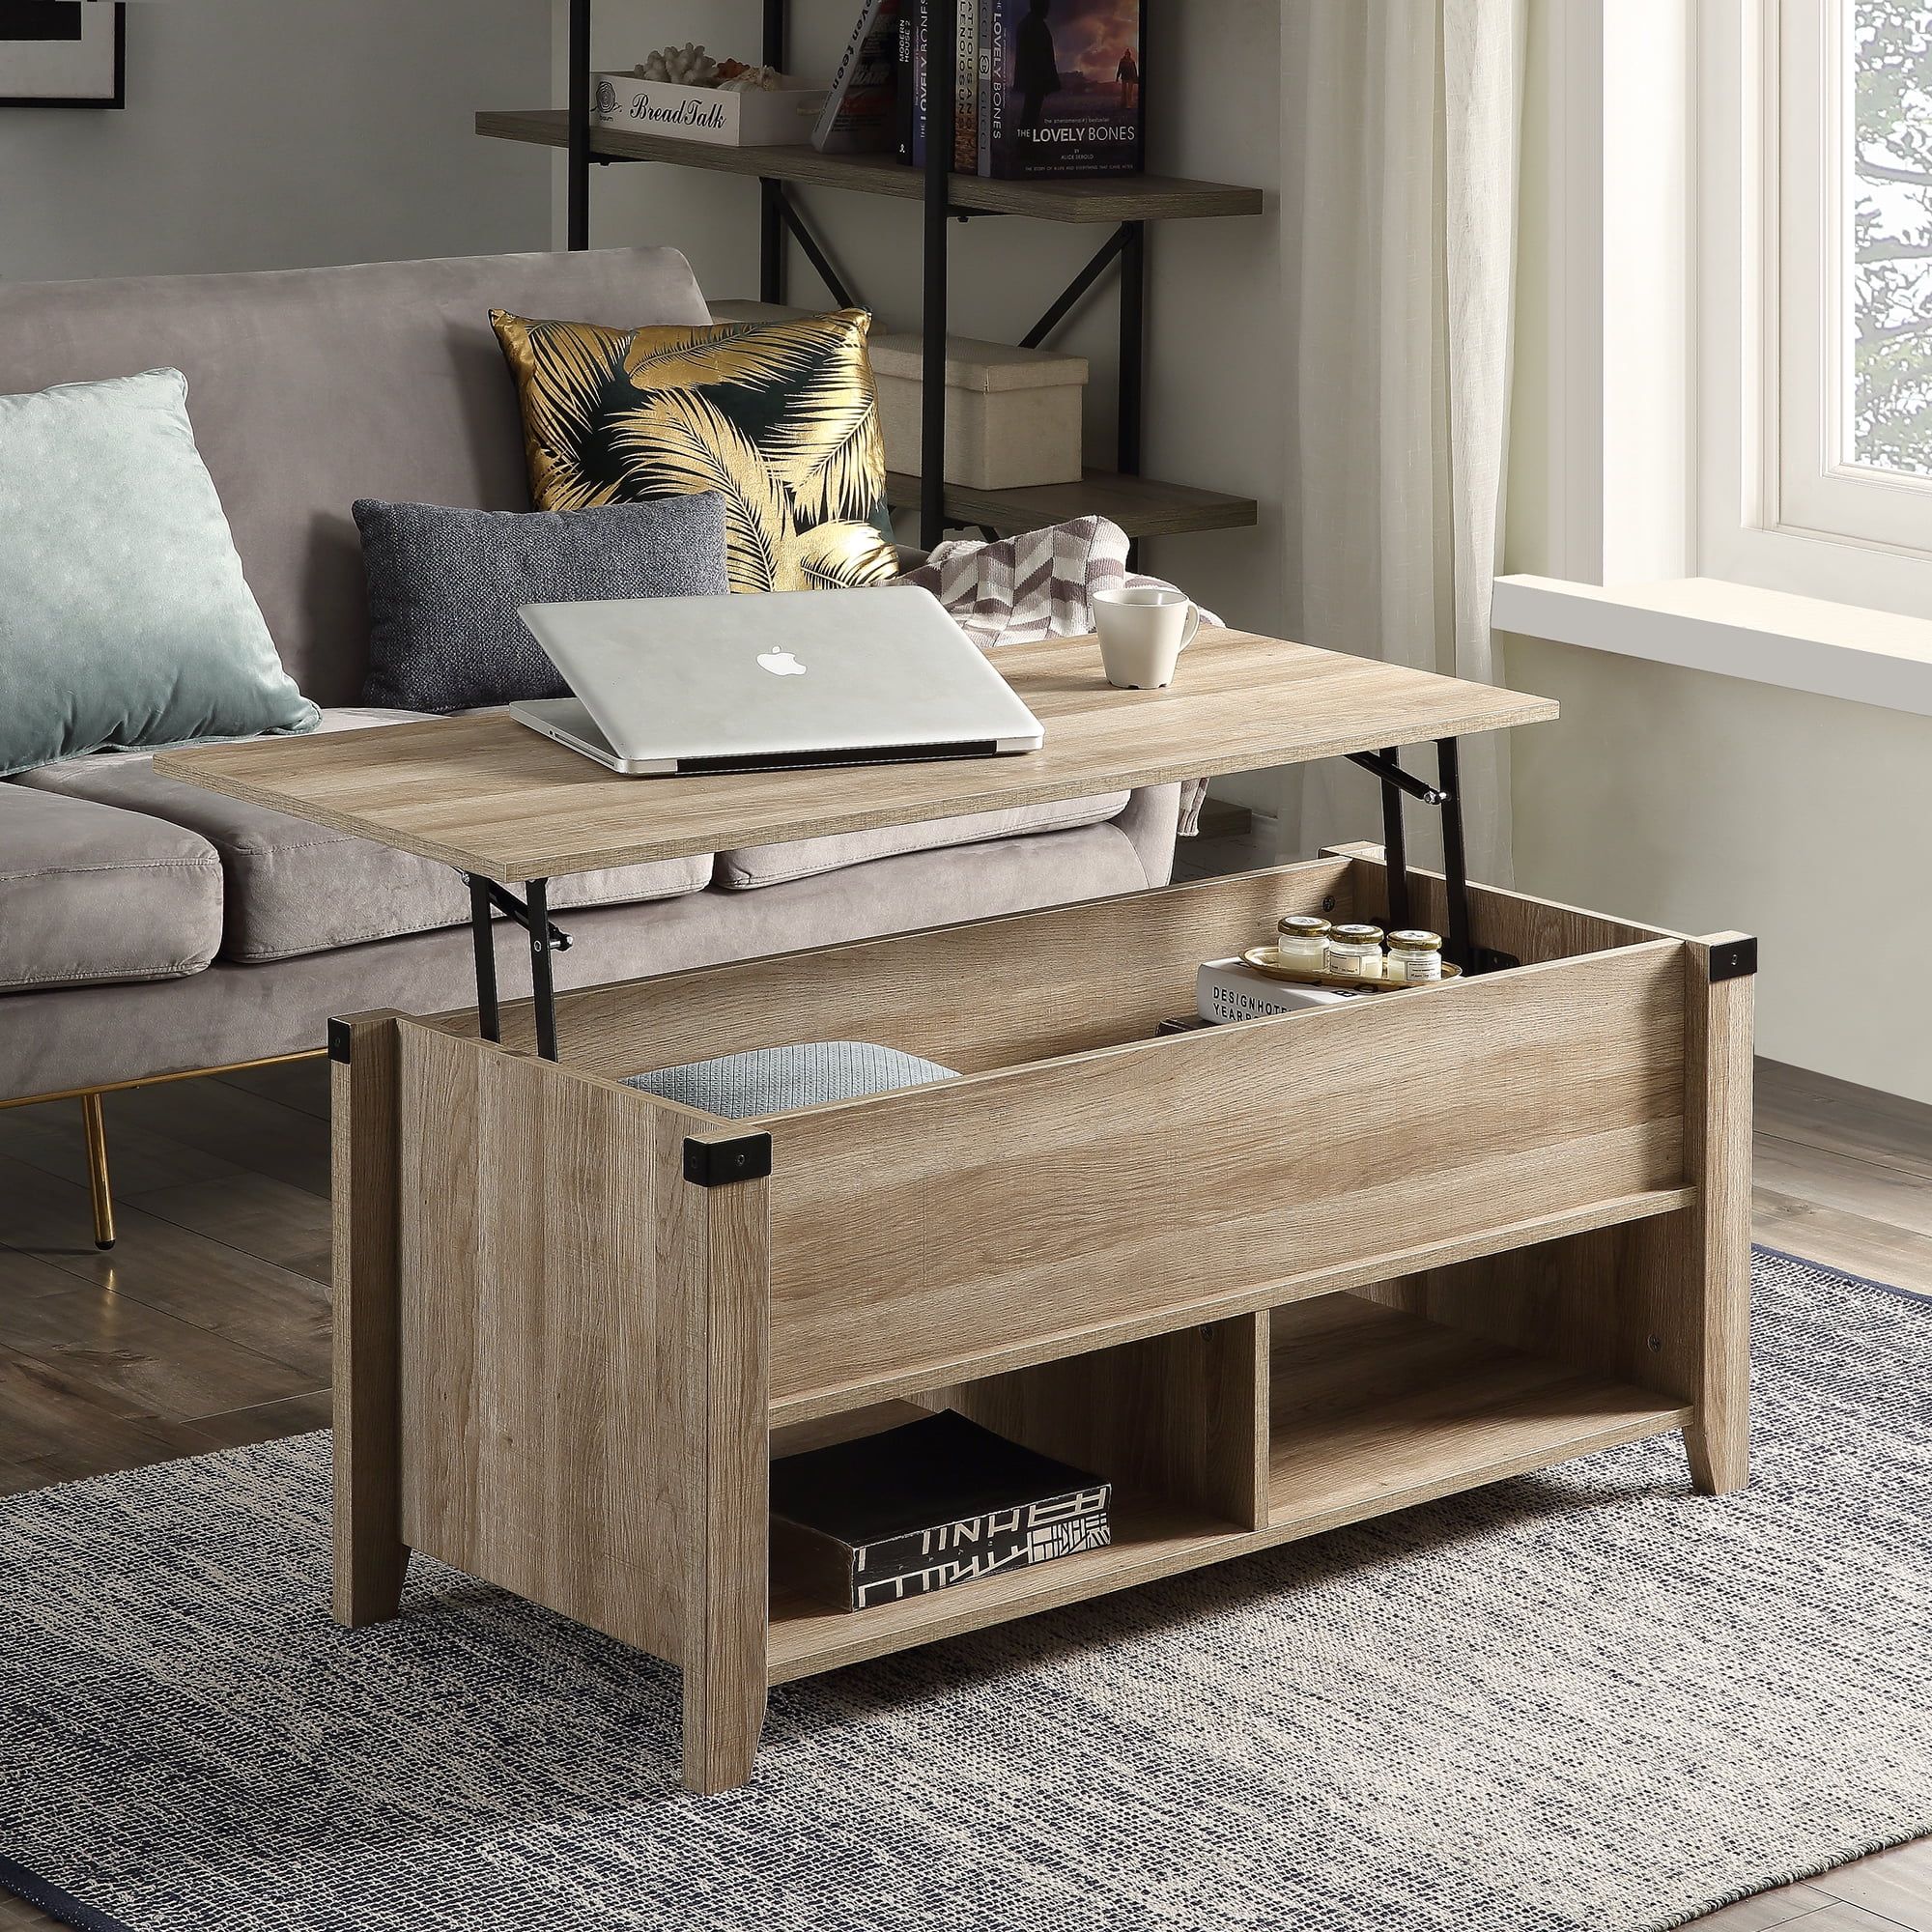 Multipurpose Coffee Table With Drawers ,open Shelf And Storage, Lifting Regarding Freestanding Tables With Drawers (Gallery 5 of 20)